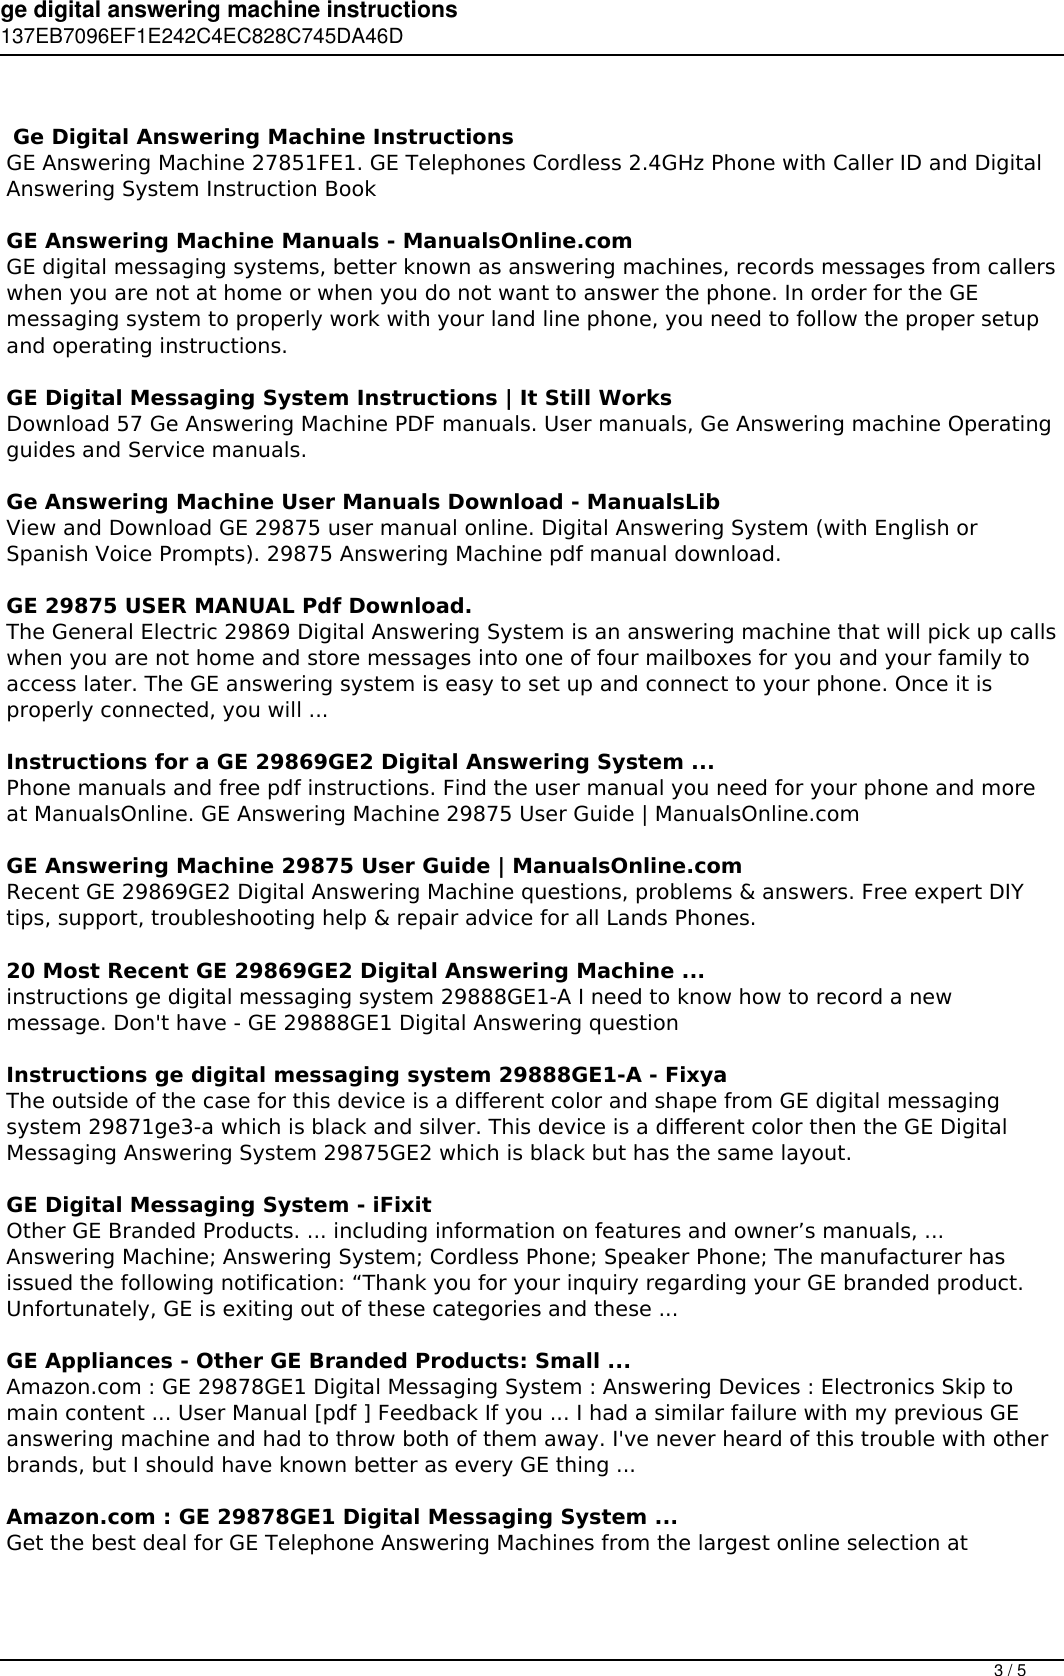 Page 3 of 5 - Ge Digital Answering Machine Instructions